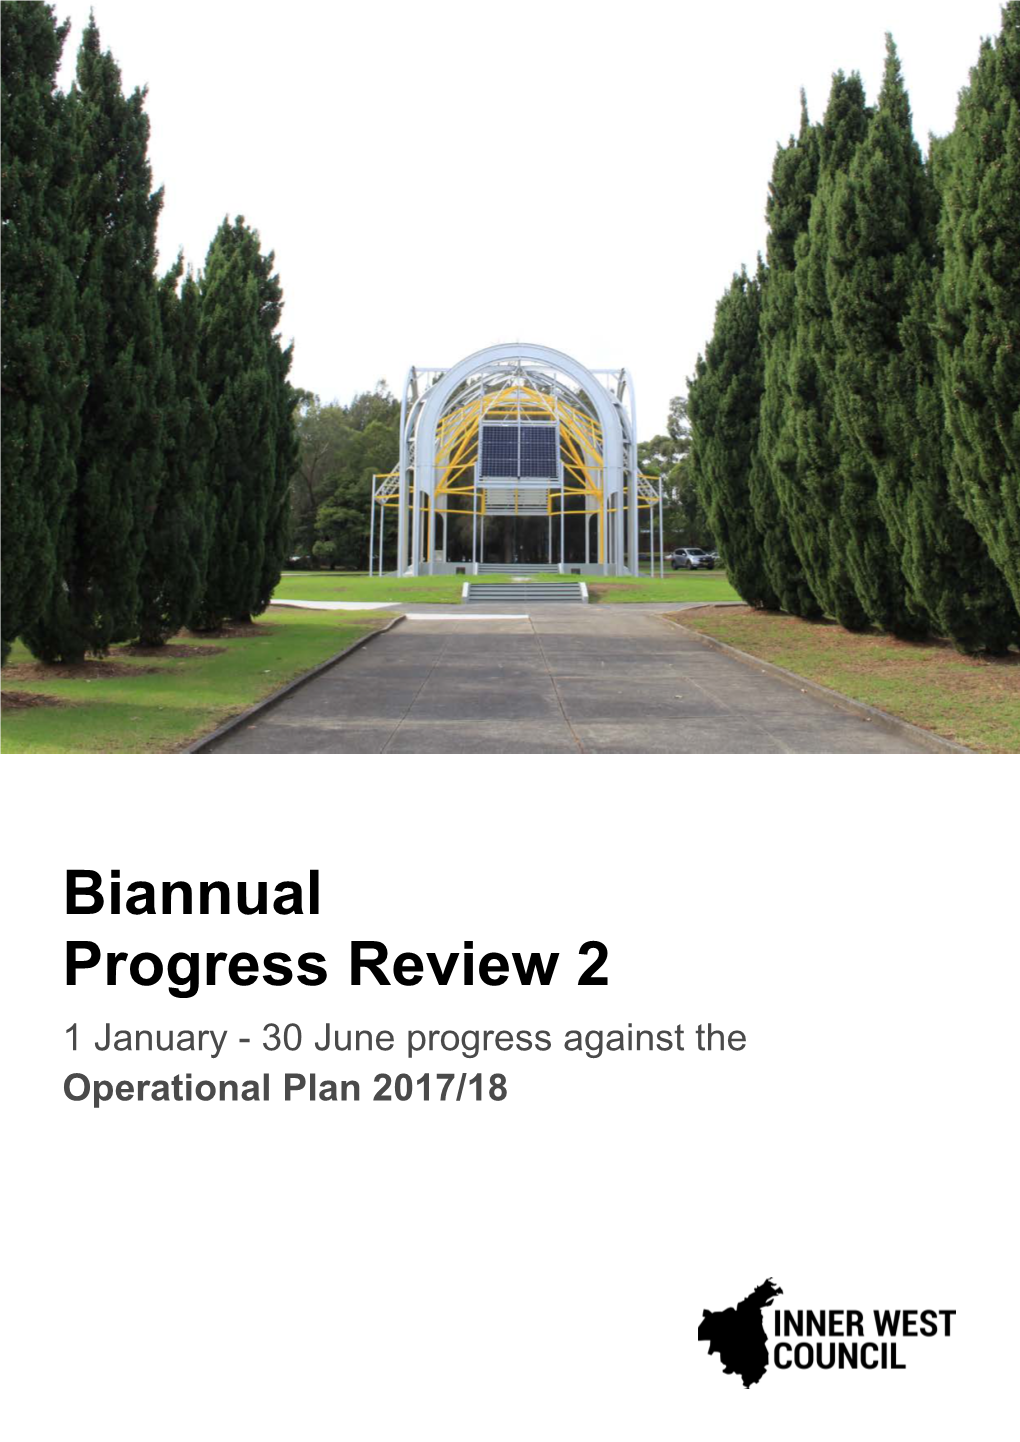 Biannual Progress Review 2 1 January - 30 June Progress Against the Operational Plan 2017/18 Contents